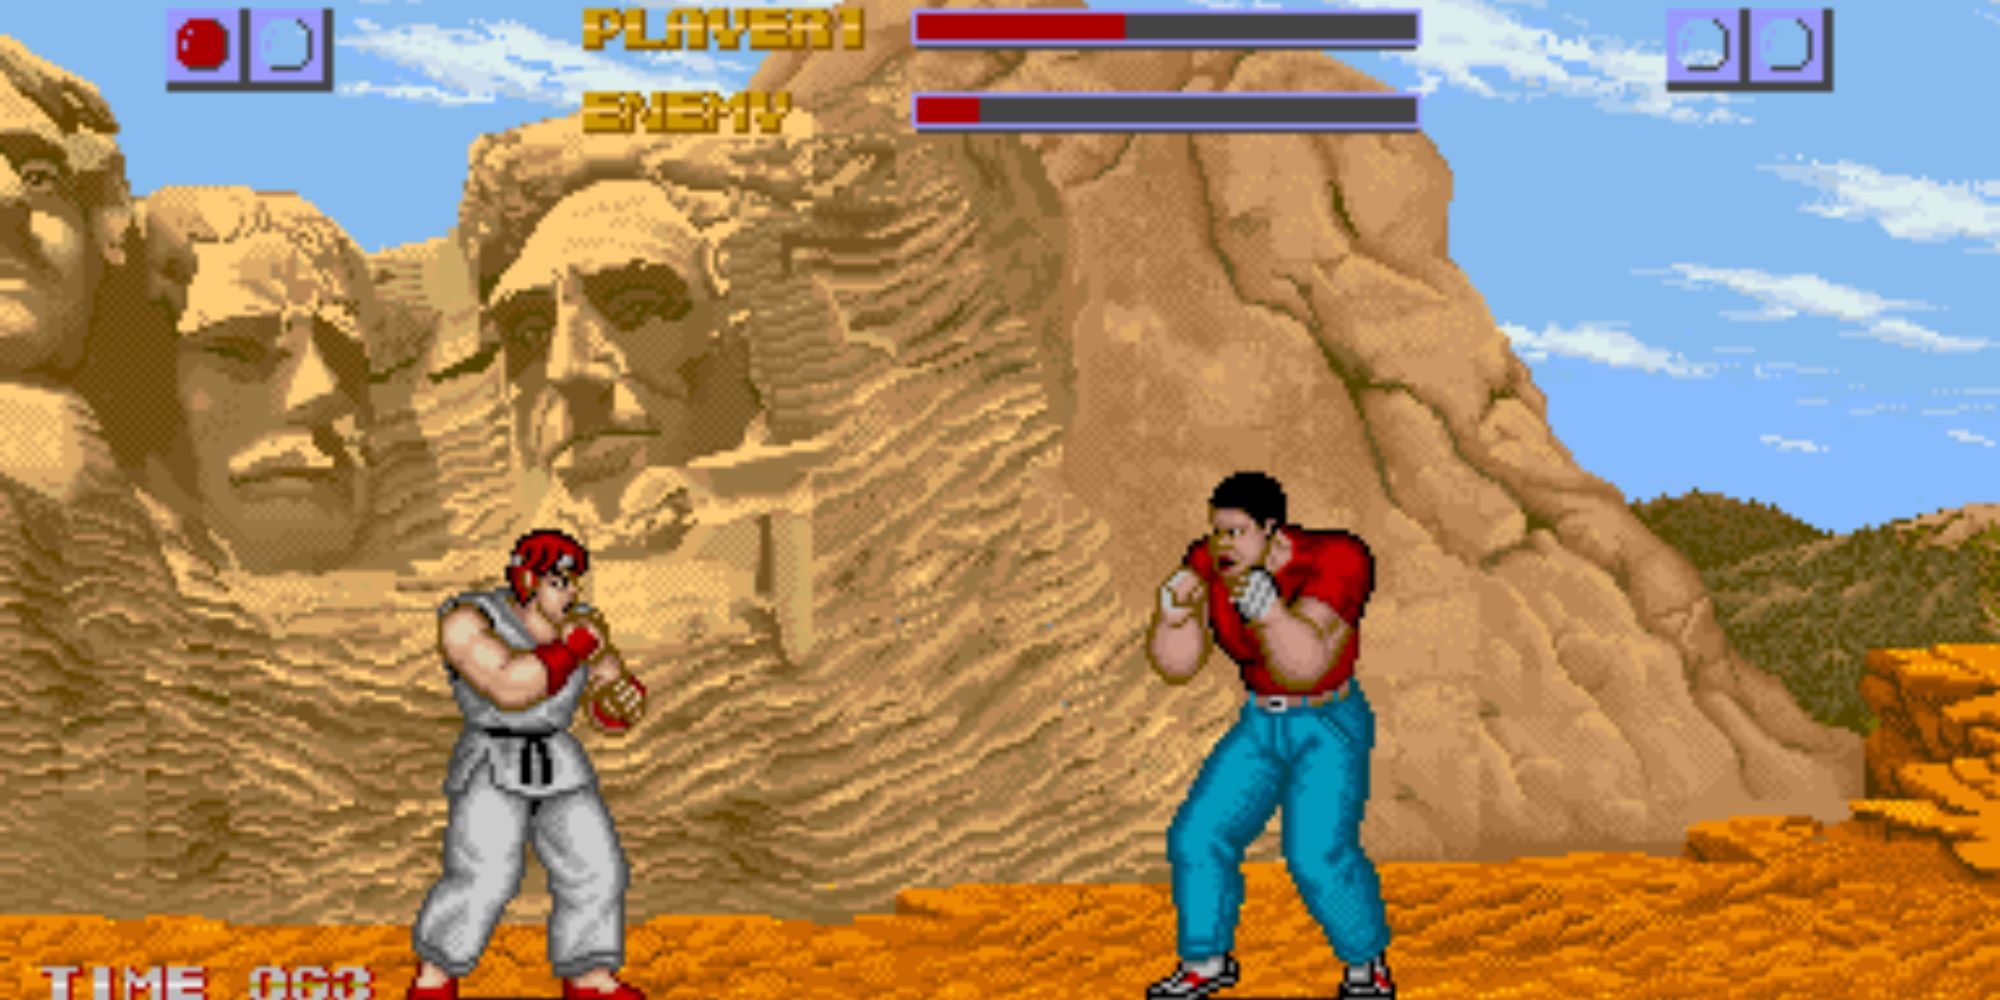 Ryu and Balrog fighting at Mt. Rushmore in the first Street Fighter 